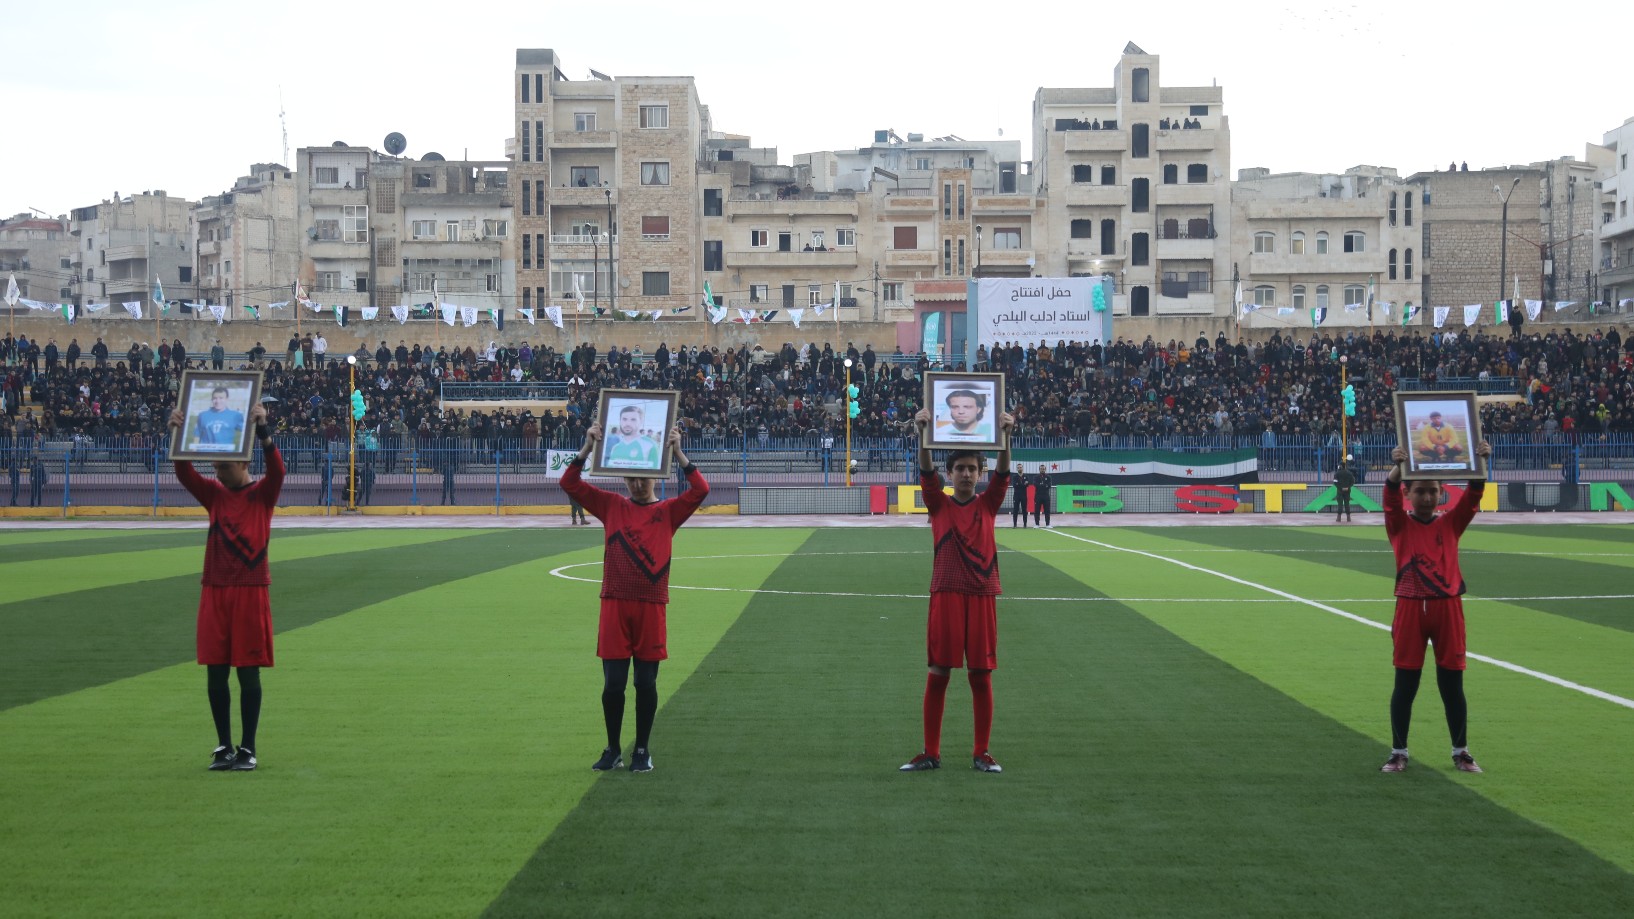 Syrian children raise pictures of slain Syria on a pitch in Idlib during the opening ceremony of the 'Camps World Cup' (MEE/Ali Haj Suleiman)